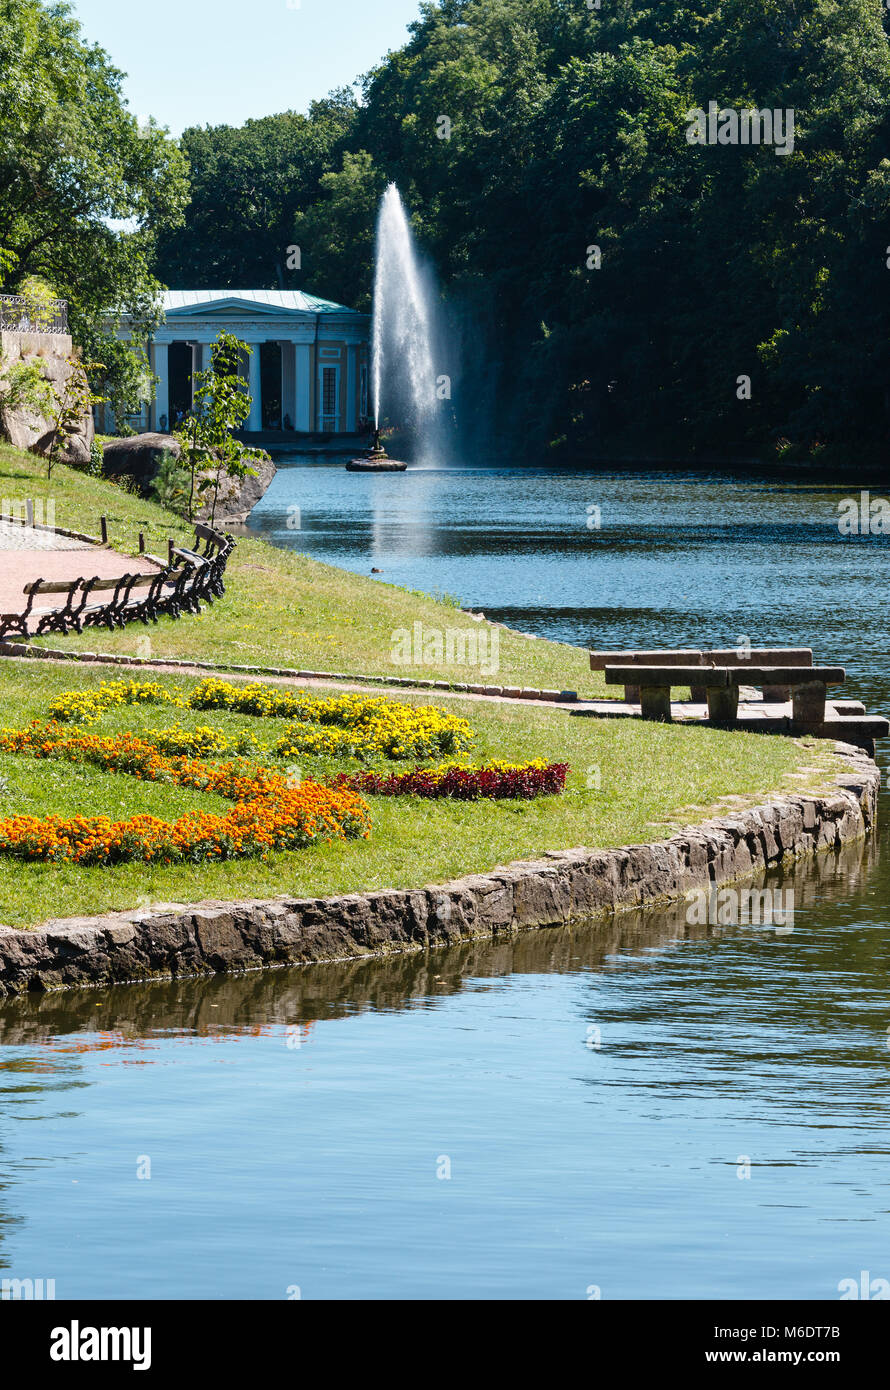 Summer National Dendrology Park of Sofiyivka, Fountain 'Snake', lake and flowerbed on lawn. Uman, Ukraine. Build in 19th century. People unrecognizabl Stock Photo